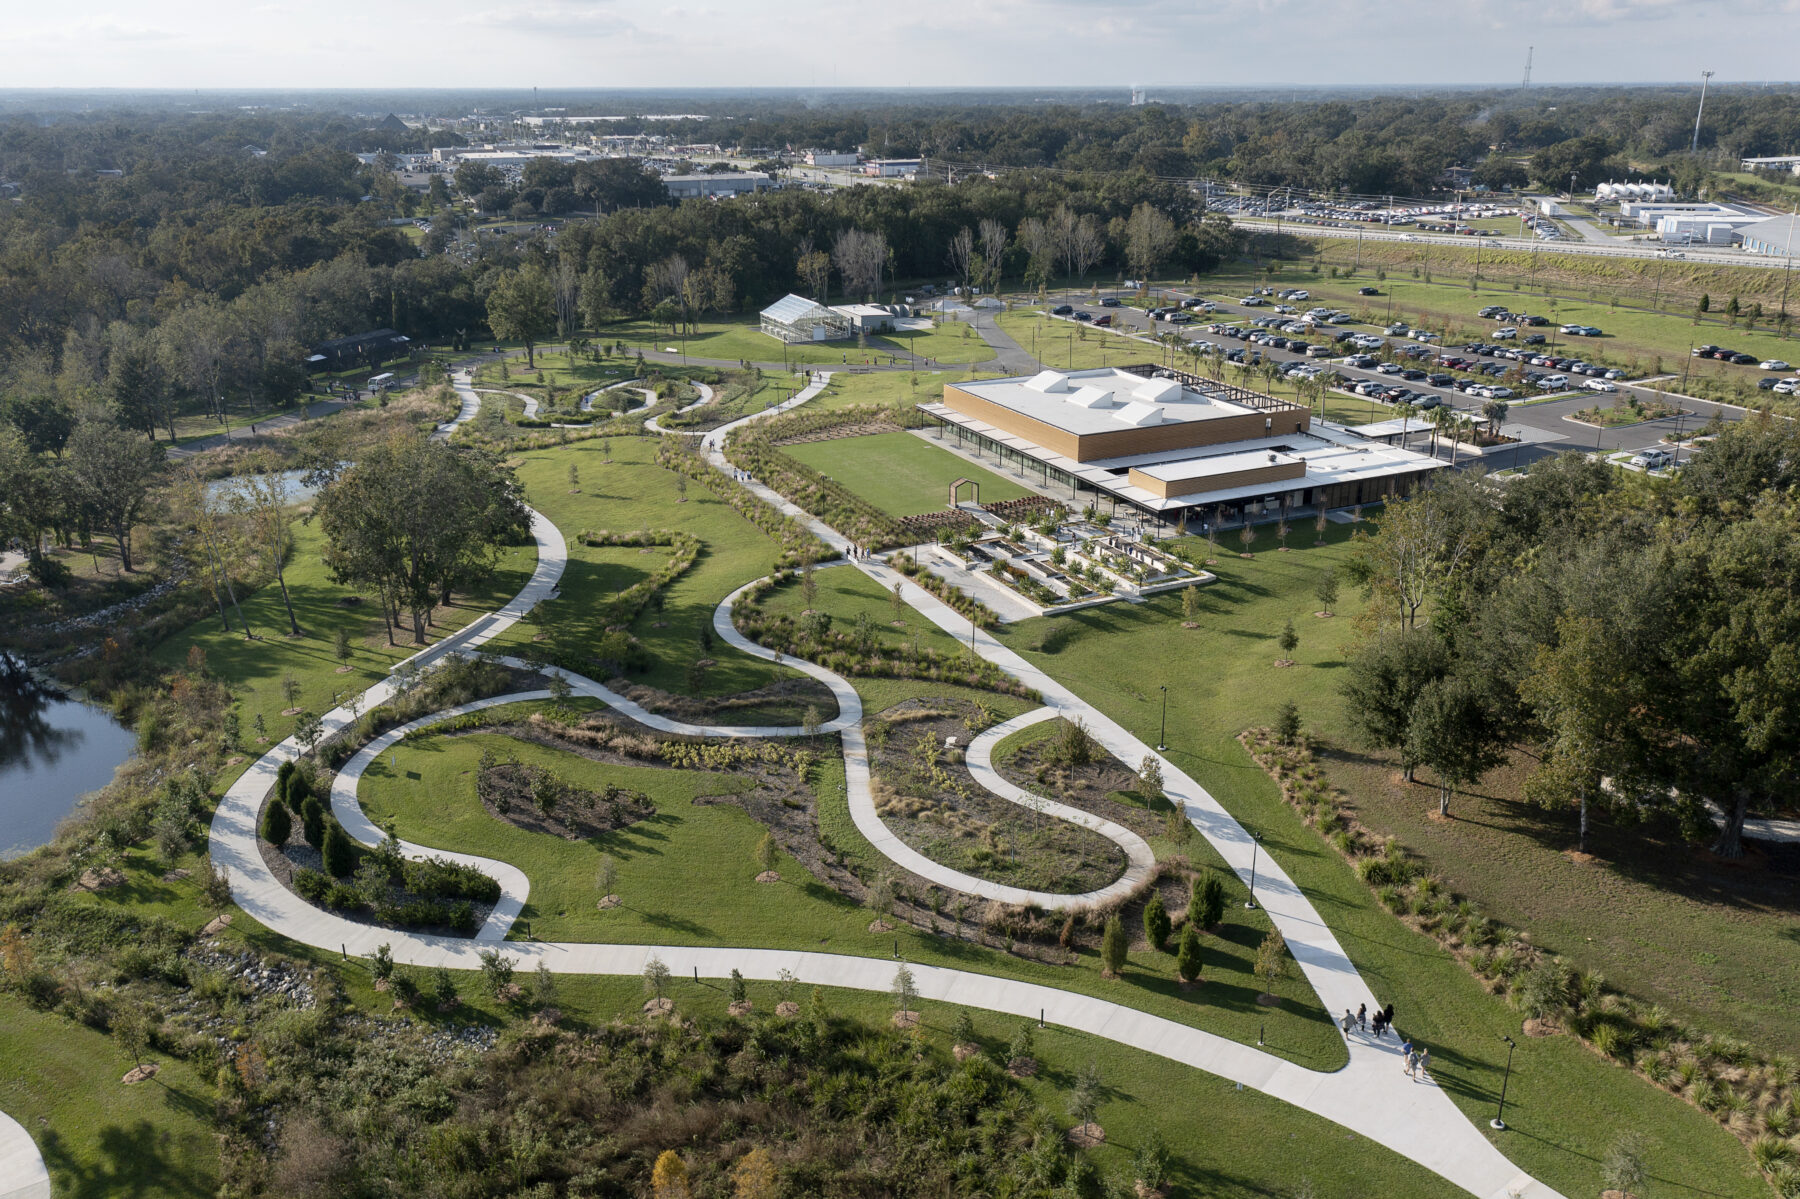 Aerial shot of the Bonnet Springs Park Event Center from the southeast showing the winding paths leading to it and around its lawn and botanical garden